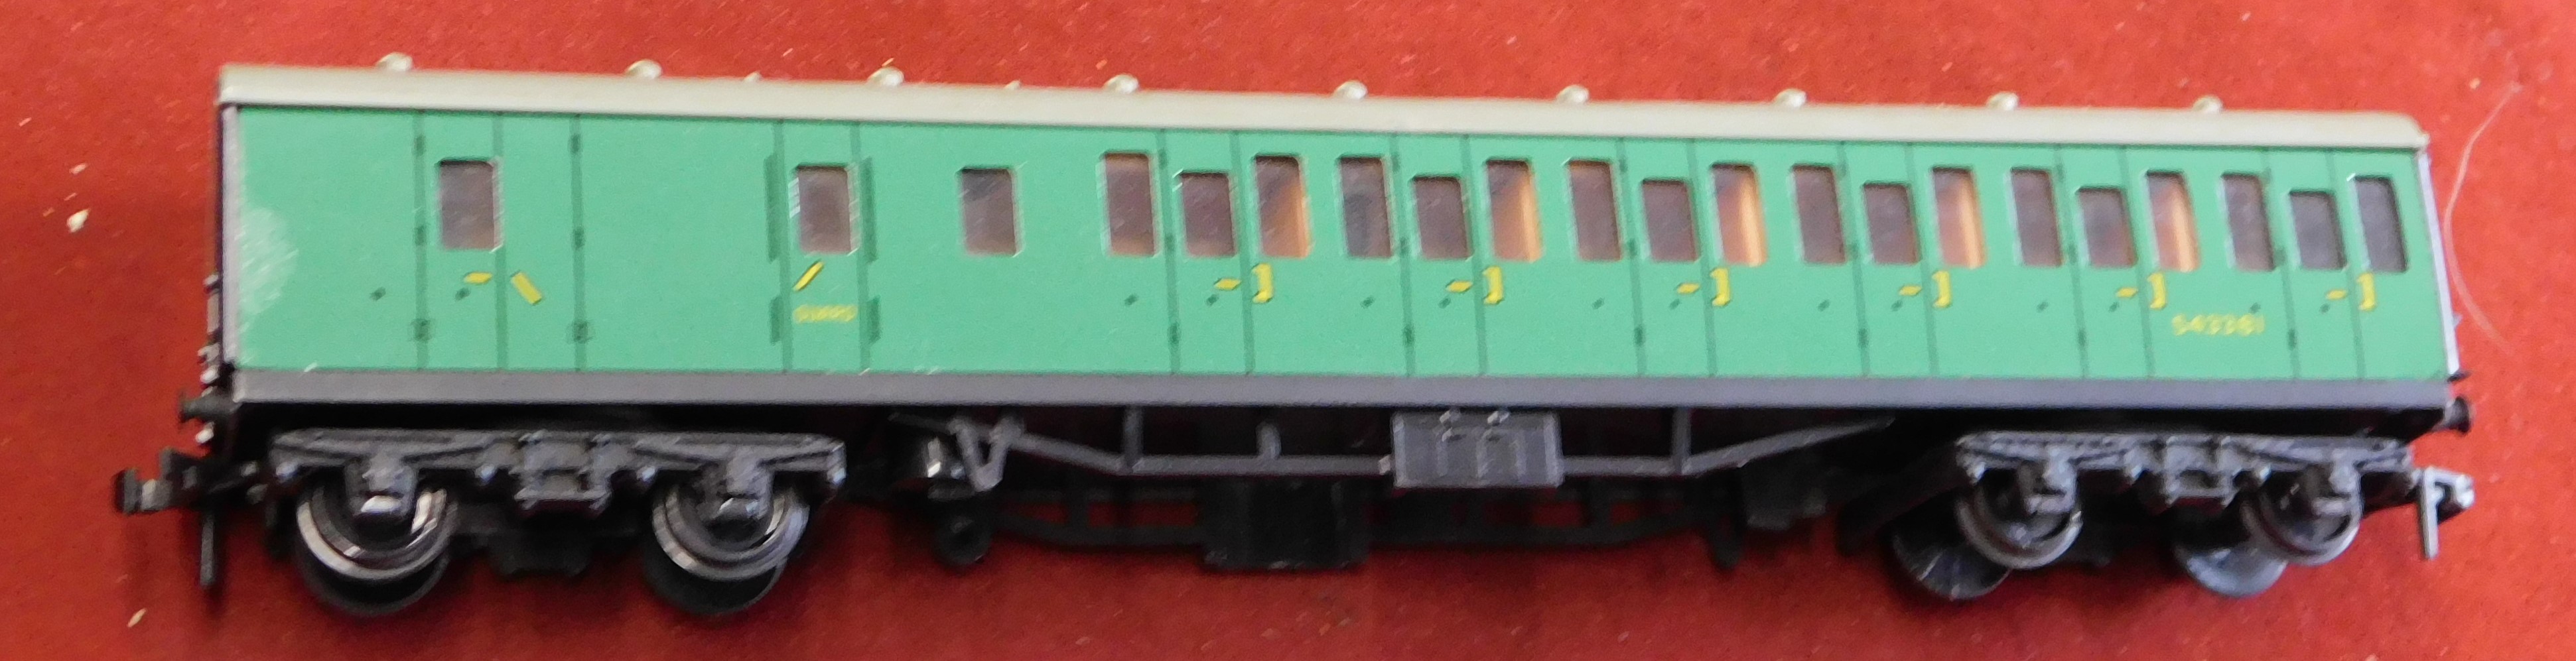 Hornby Dublo 'OO' Gauge Platform Extension with wall and set of railers, 1x D20 Restaurant Car - Image 4 of 6